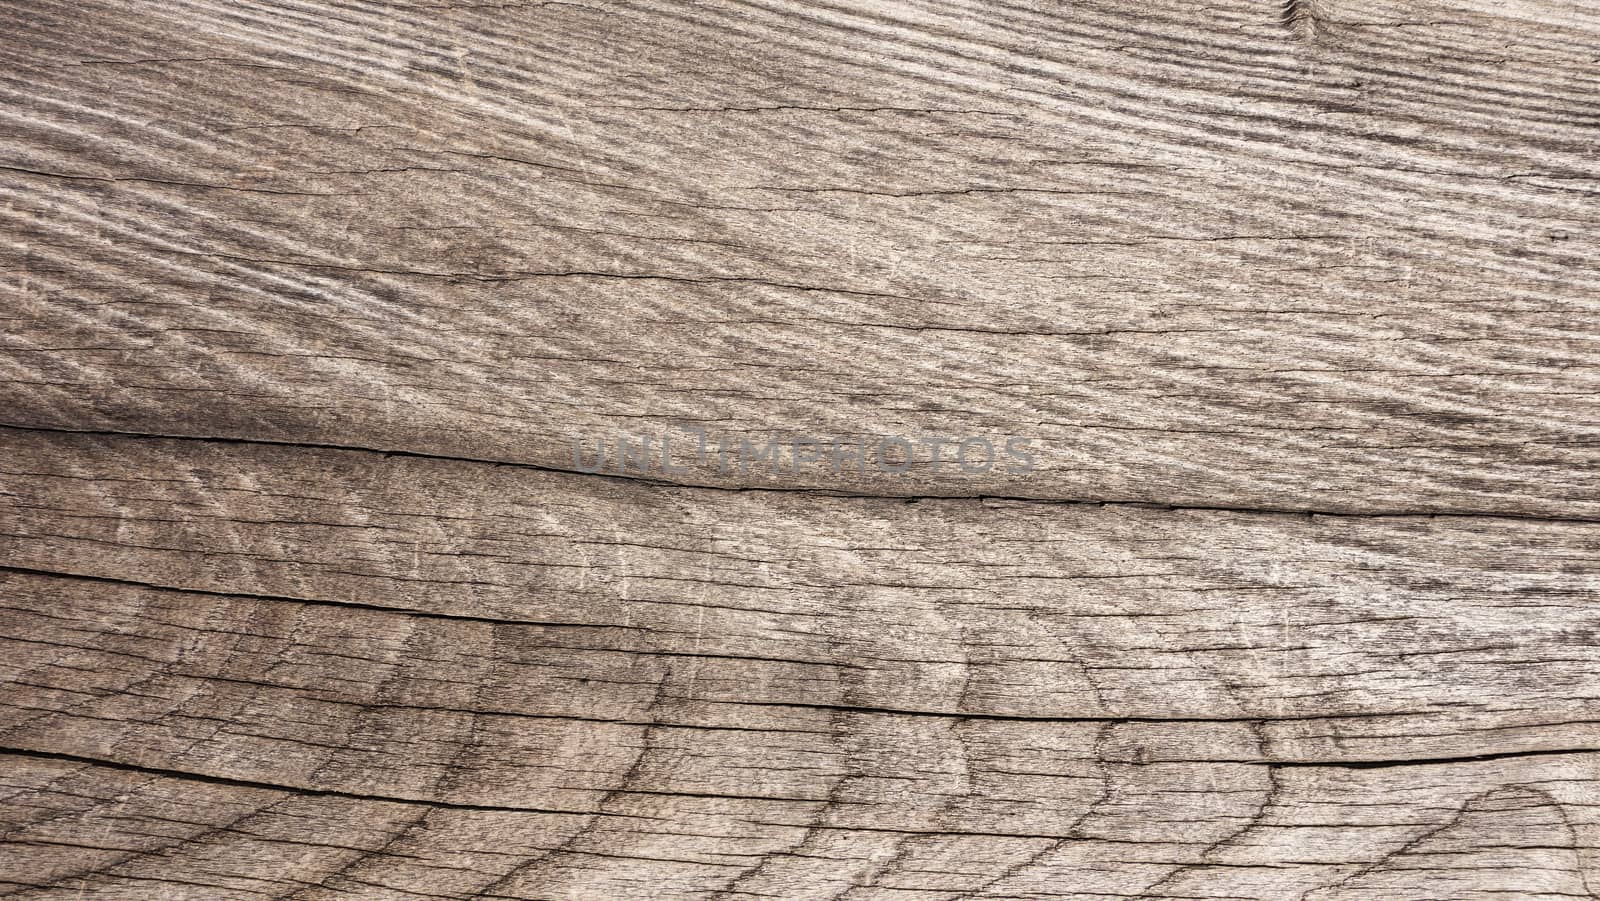 old wood texture with natural pattern by Kingsman911